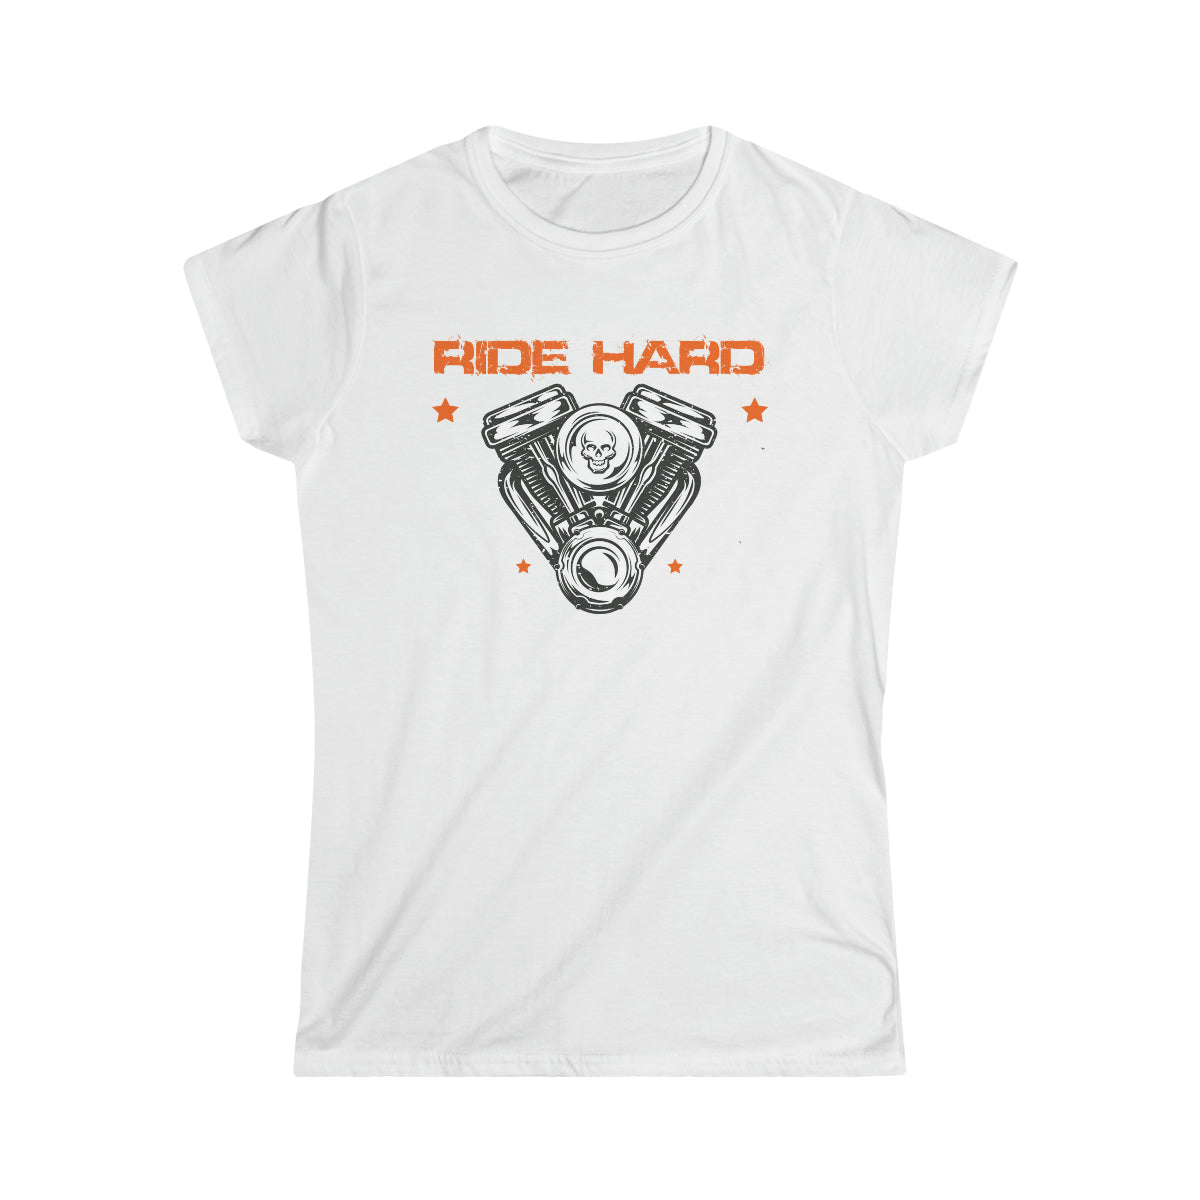 Ride Hard Women's Softstyle Tee Black or White